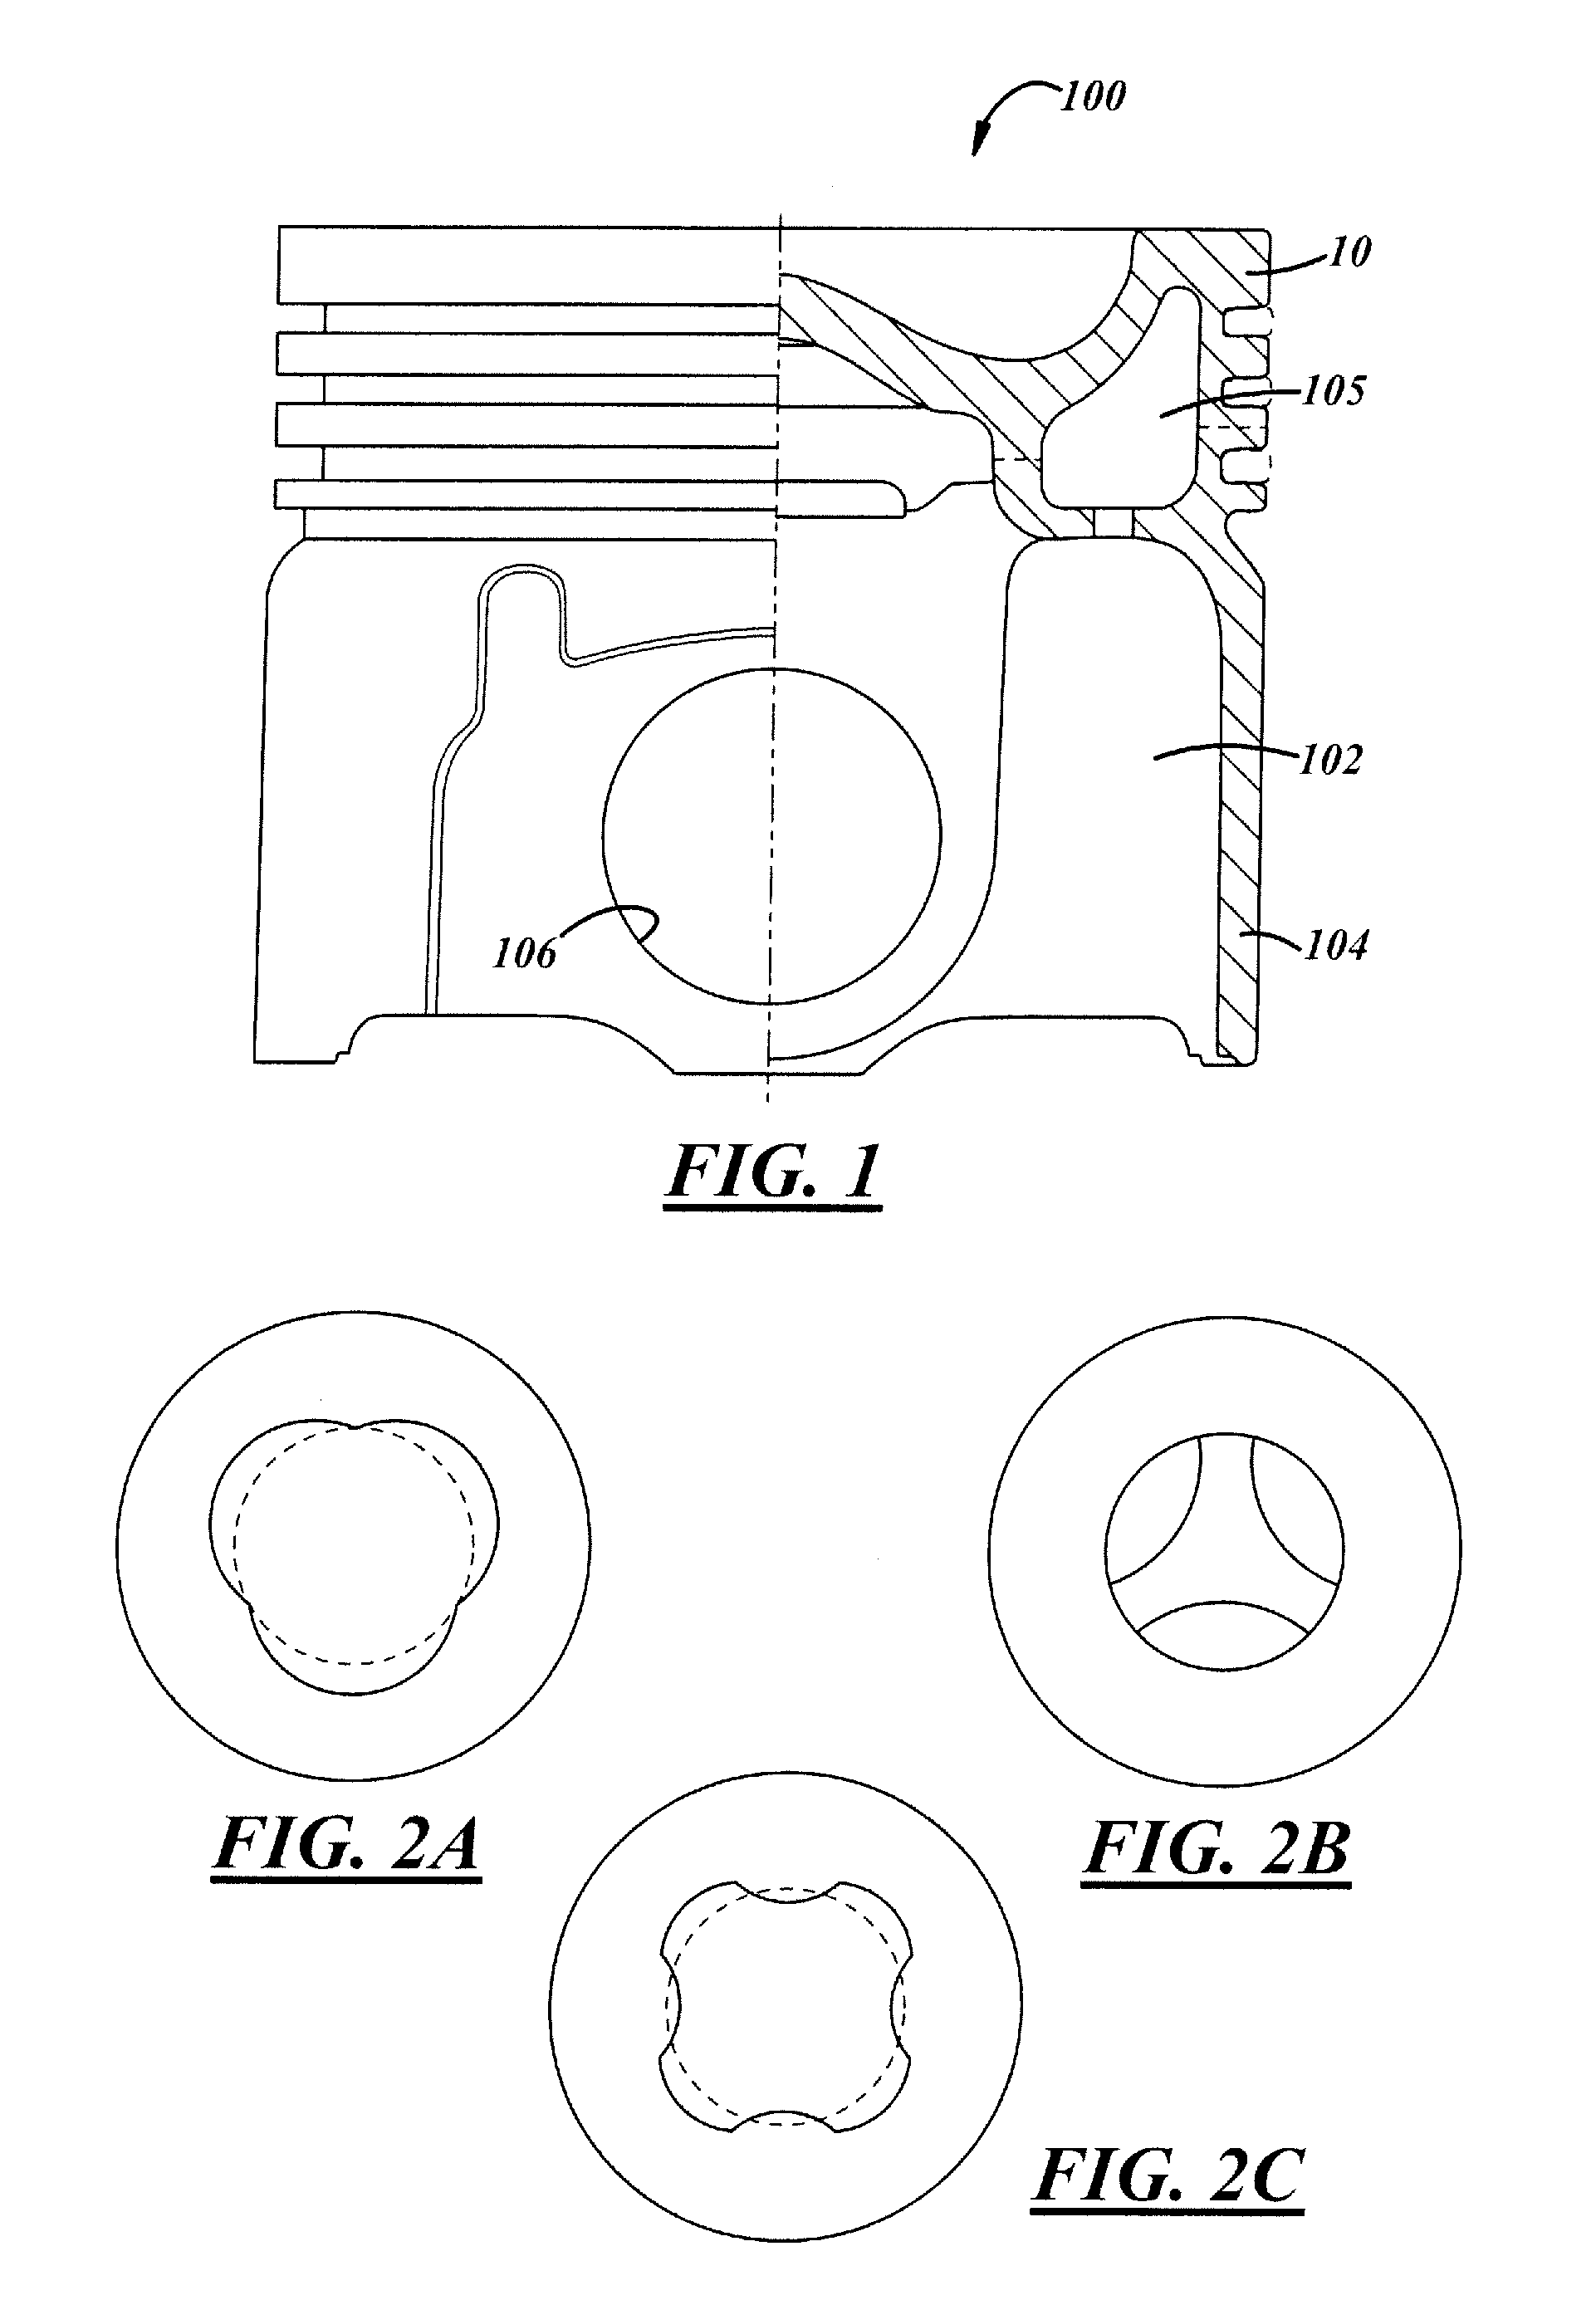 Complex-Shaped Piston Oil Galleries With Piston Crowns Made By Cast Metal or Powder Metal Processes